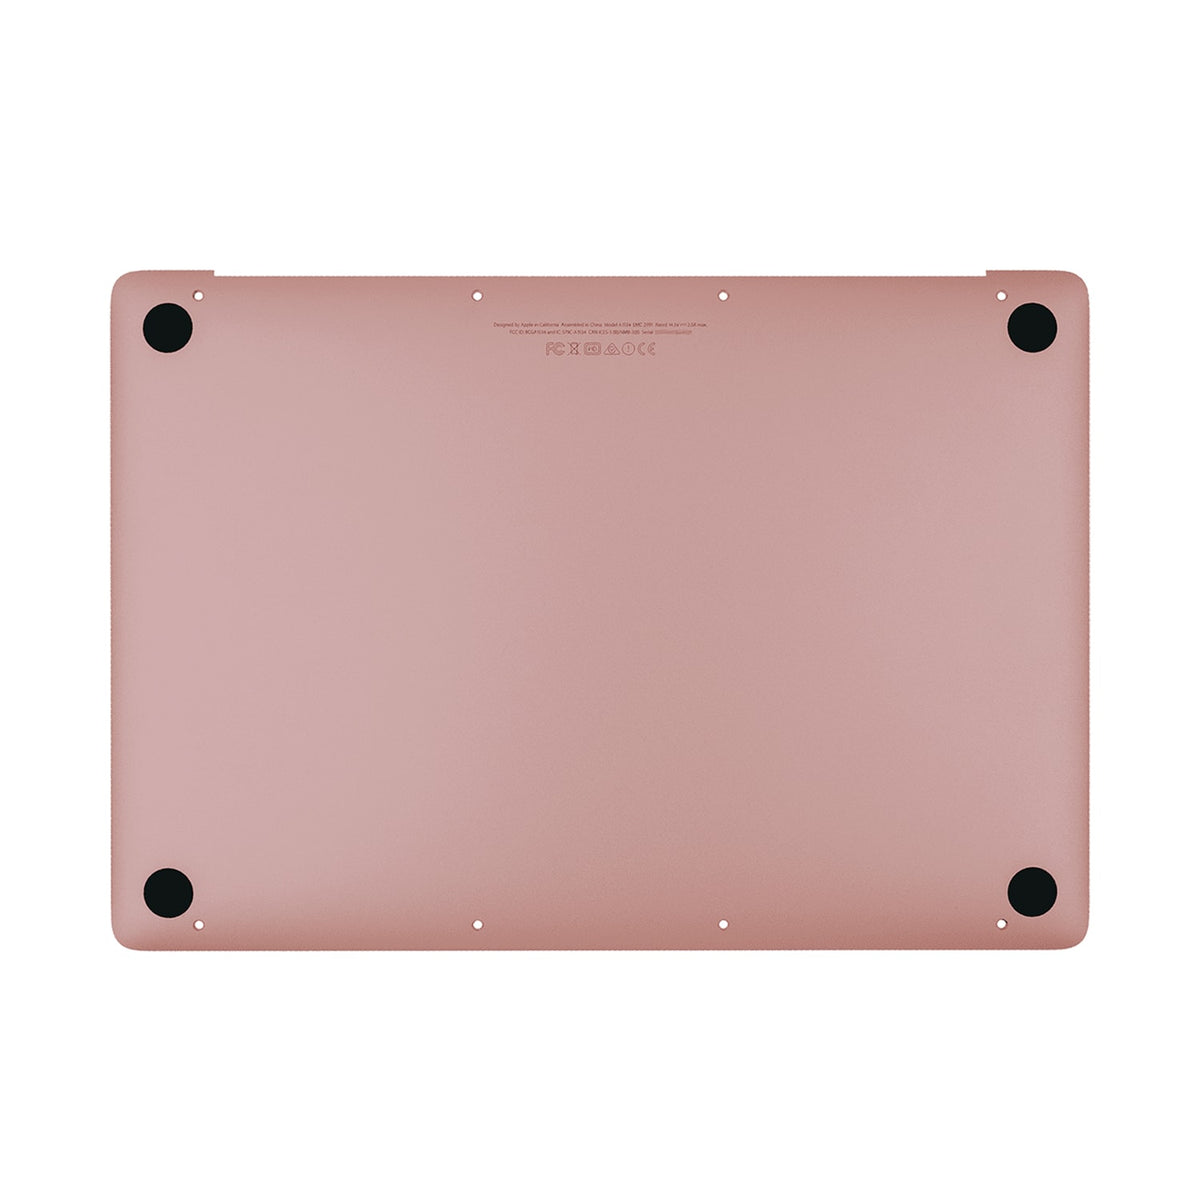 ROSE LOWER CASE FOR MACBOOK 12" RETINA A1534 (EARLY 2015)